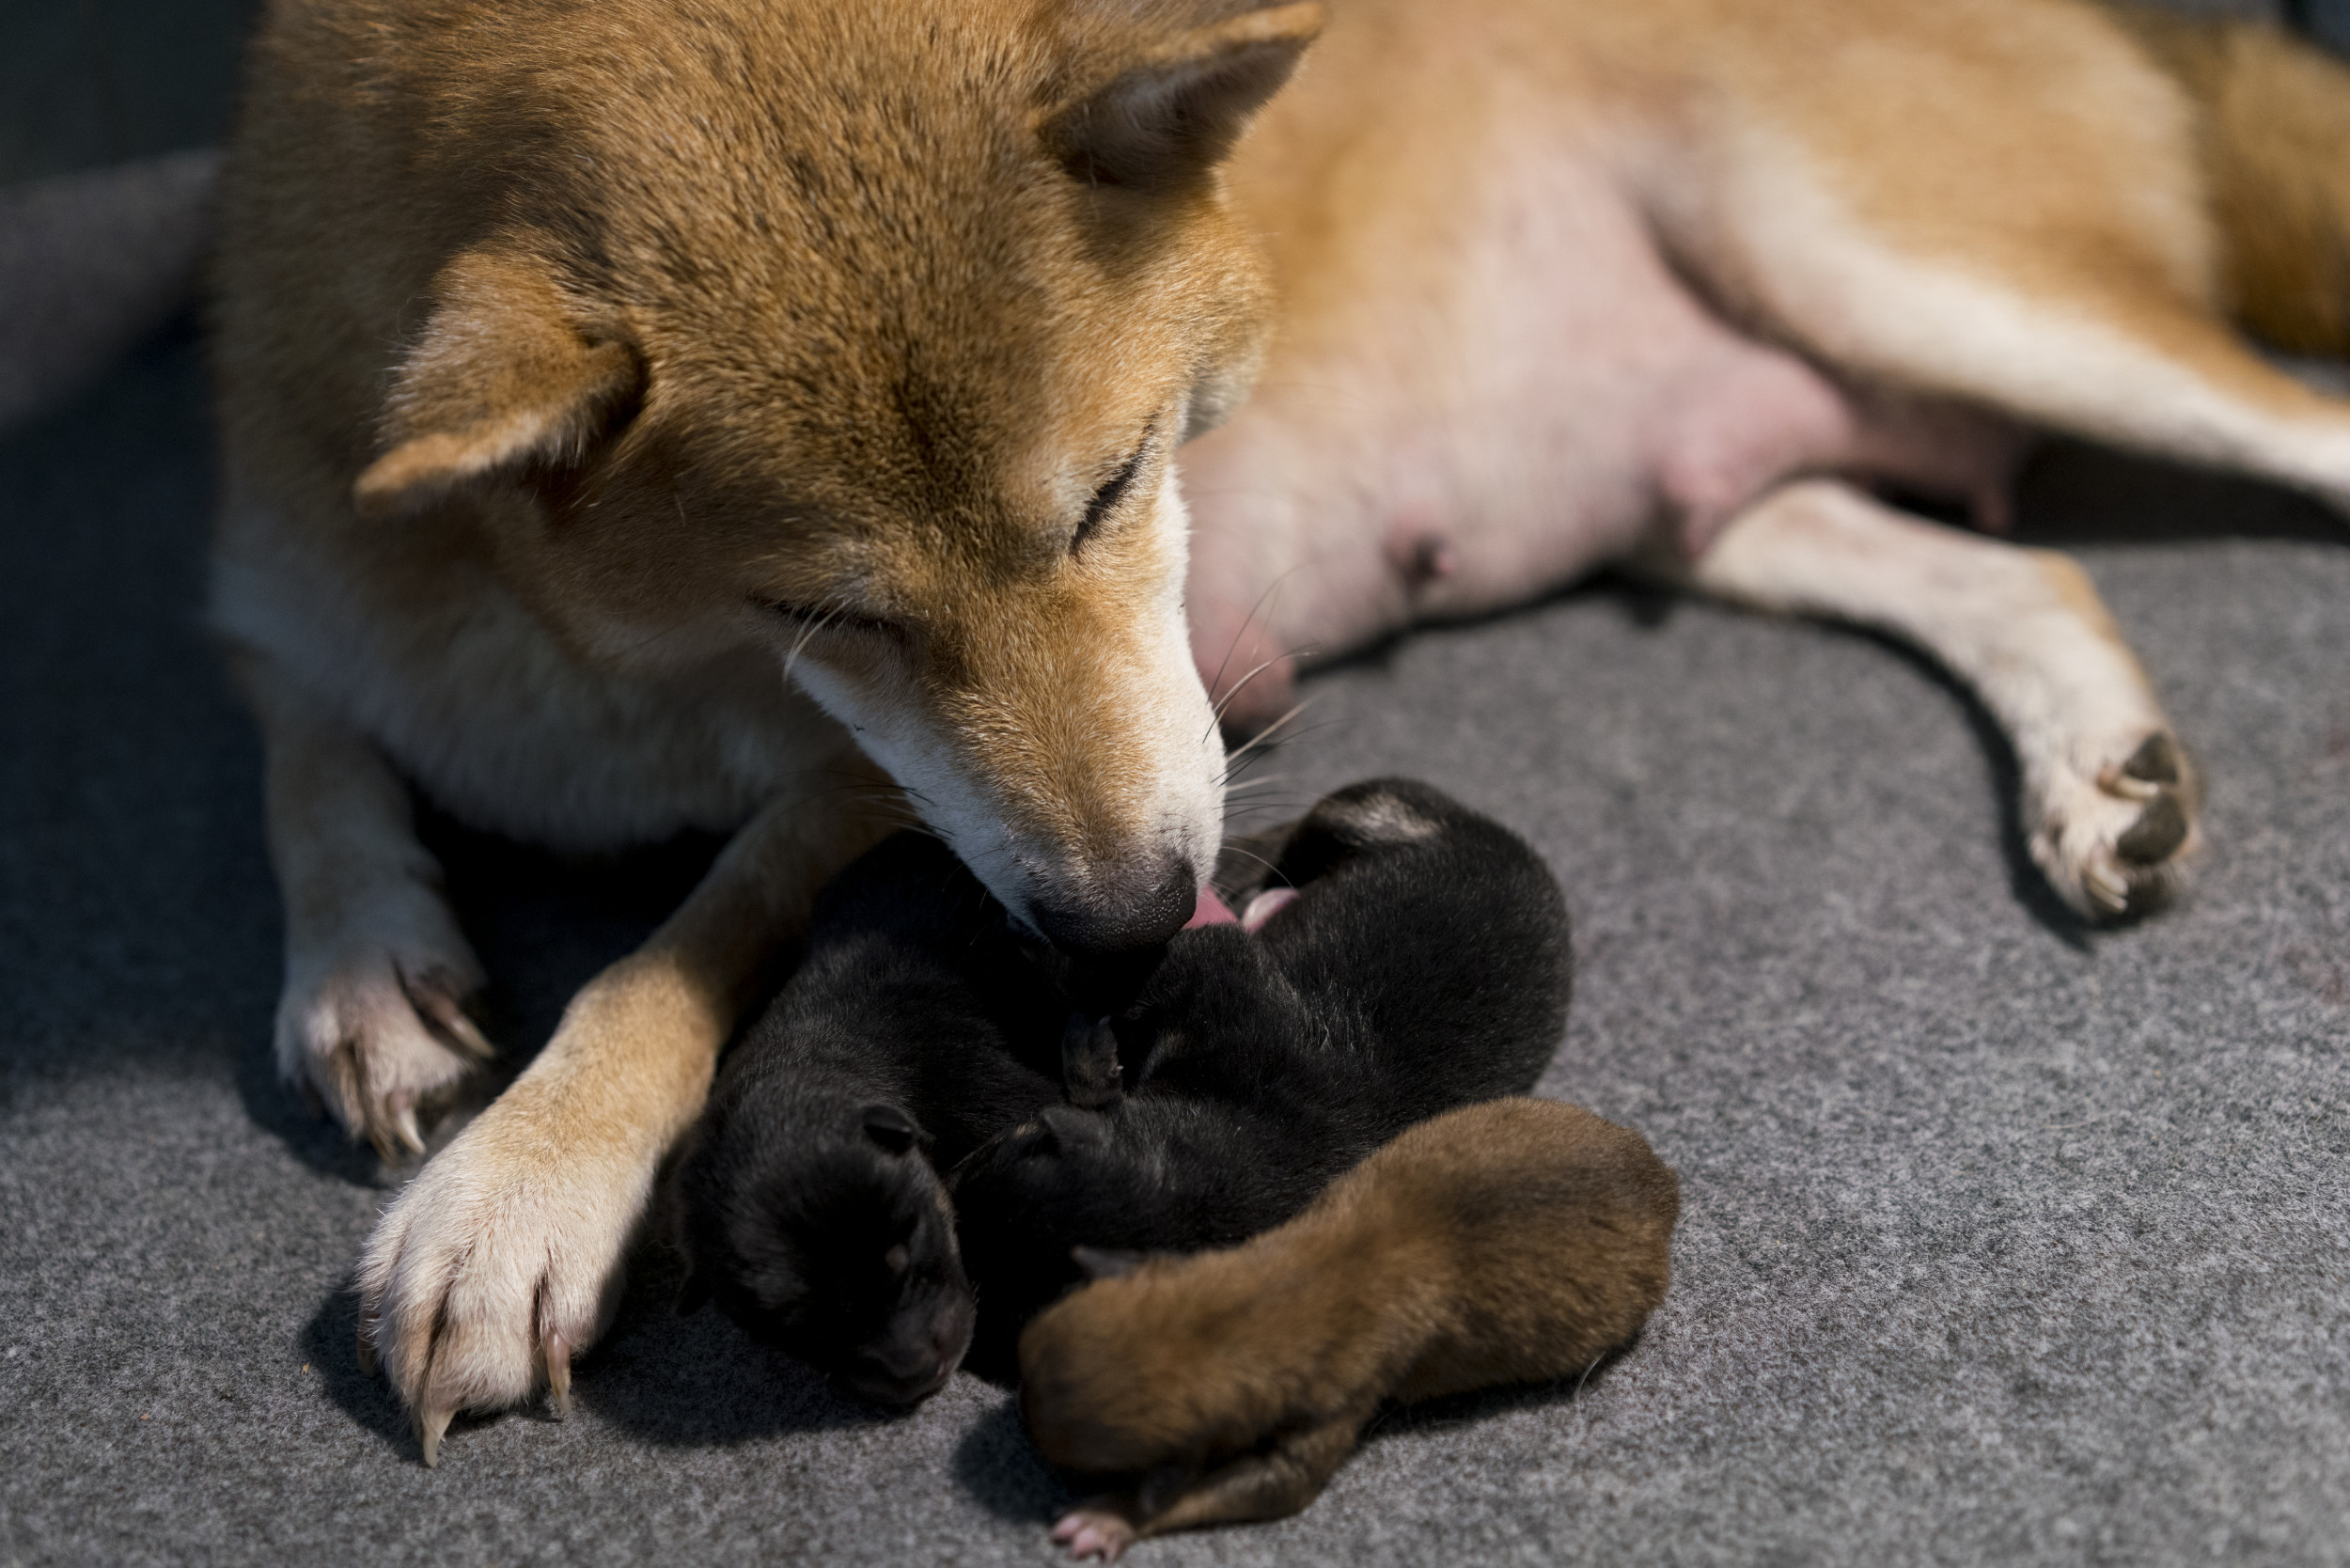 Mother Dog Who Lost Entire Litter Adopts 10 Puppies Who Lost Their Mom